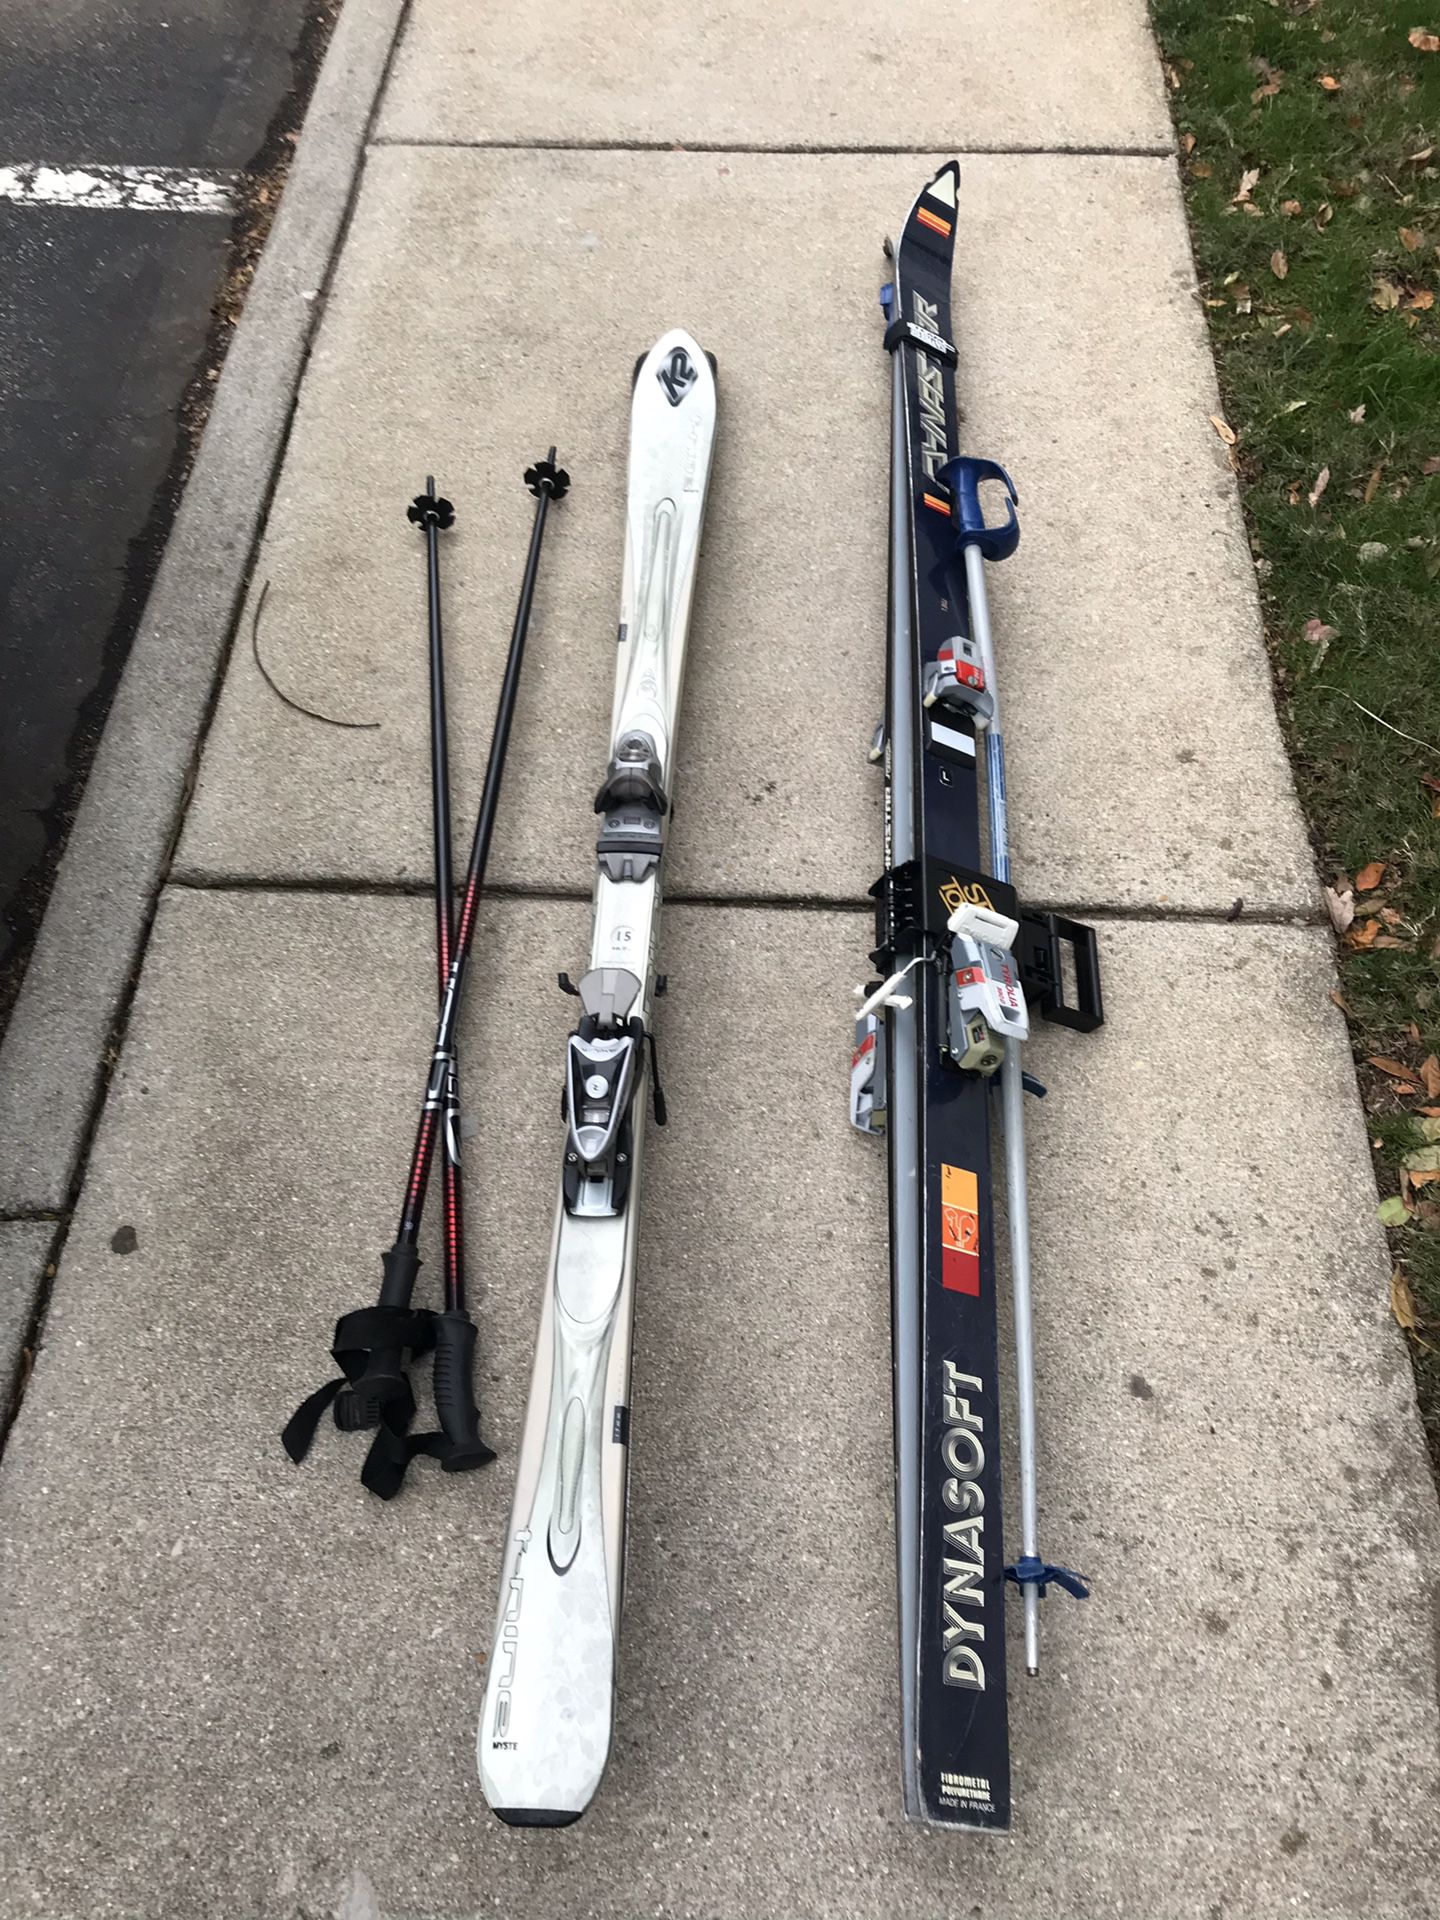 Skis-2 pairs with poles together for $35